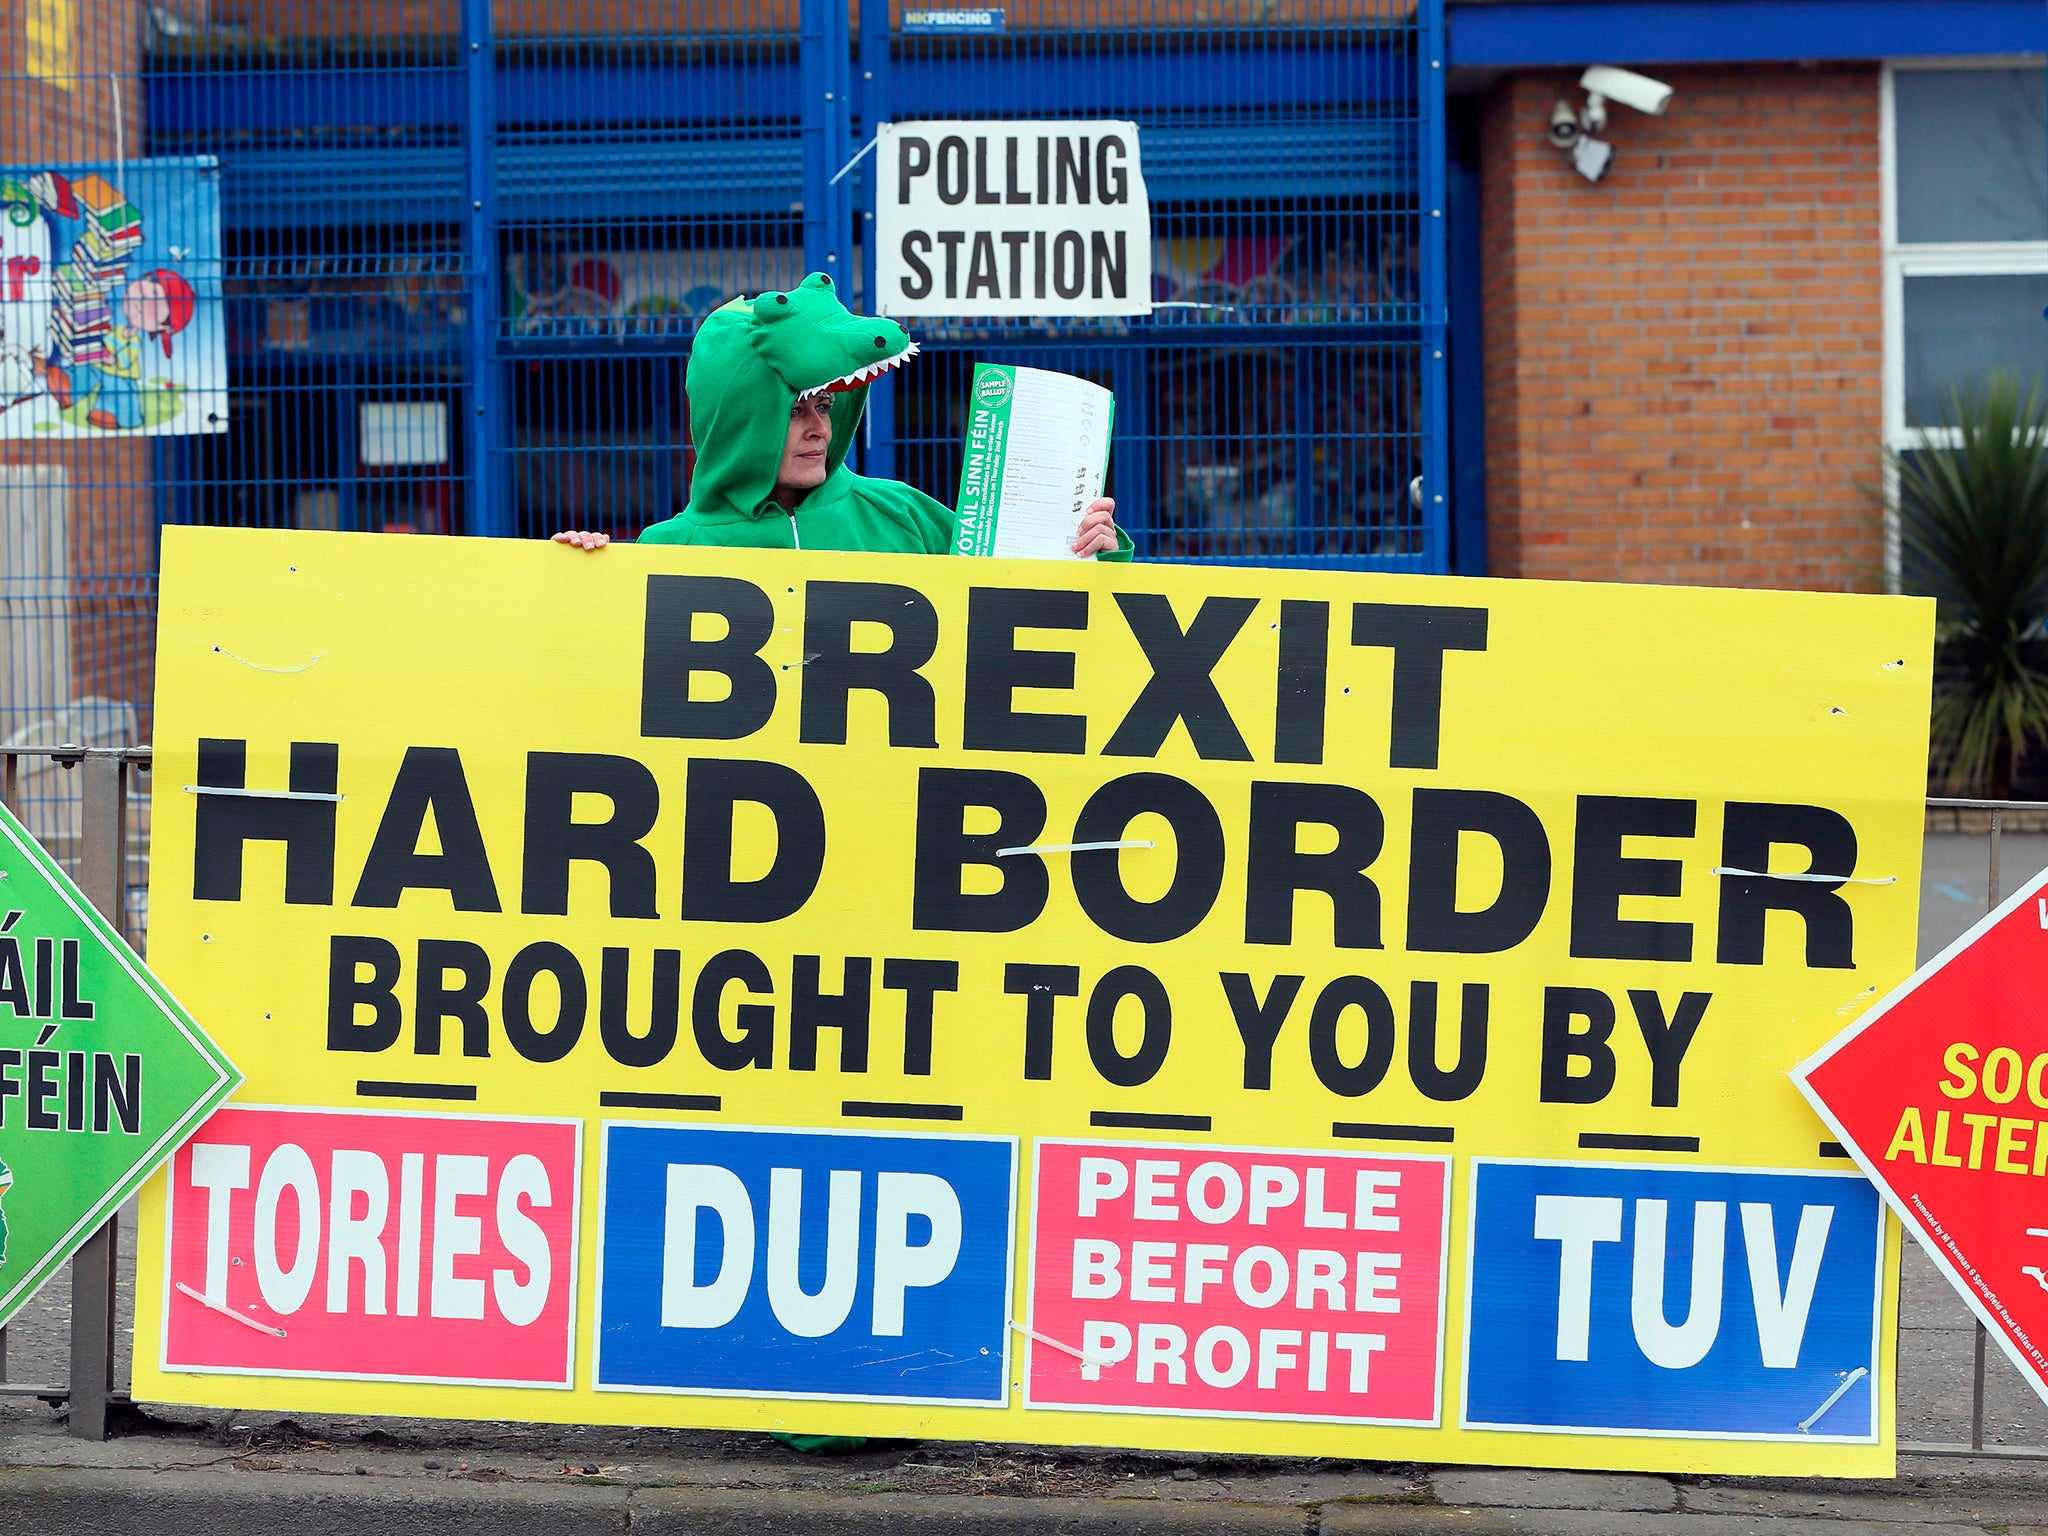 A Sinn Fein party election worker dressed up as a crocodile stands behind a banner referring to Brexit outside a polling station in Belfast